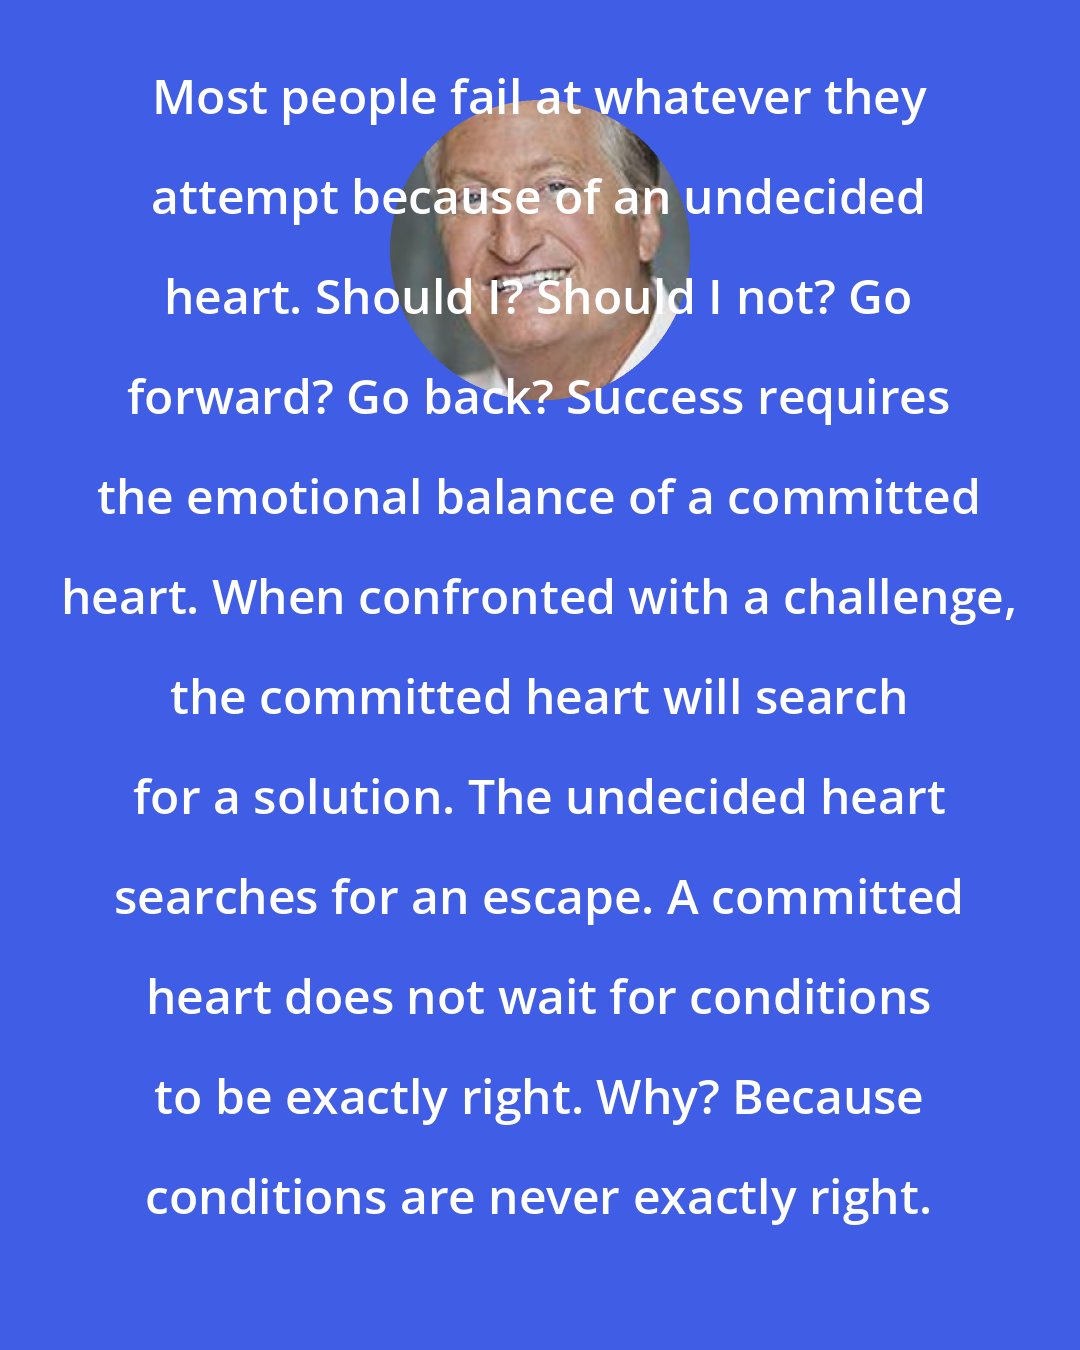 Andy Andrews: Most people fail at whatever they attempt because of an undecided heart. Should I? Should I not? Go forward? Go back? Success requires the emotional balance of a committed heart. When confronted with a challenge, the committed heart will search for a solution. The undecided heart searches for an escape. A committed heart does not wait for conditions to be exactly right. Why? Because conditions are never exactly right.